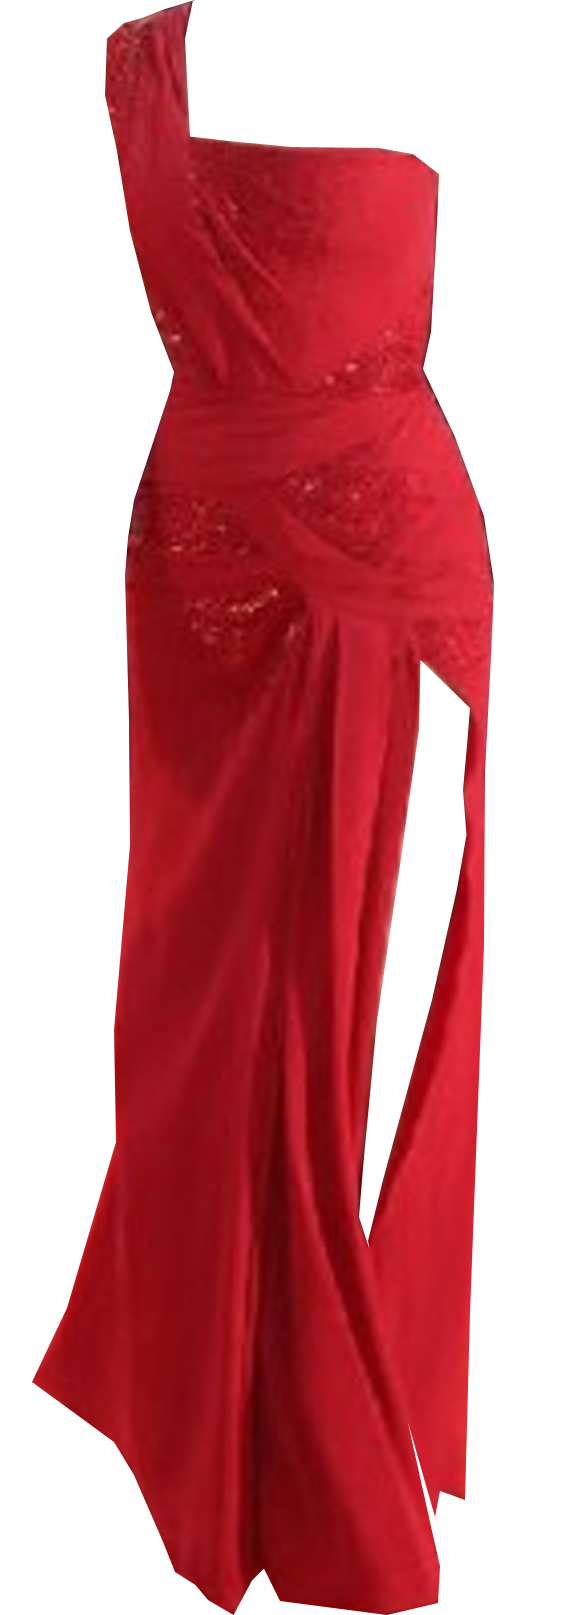 Dress Red PNG Background